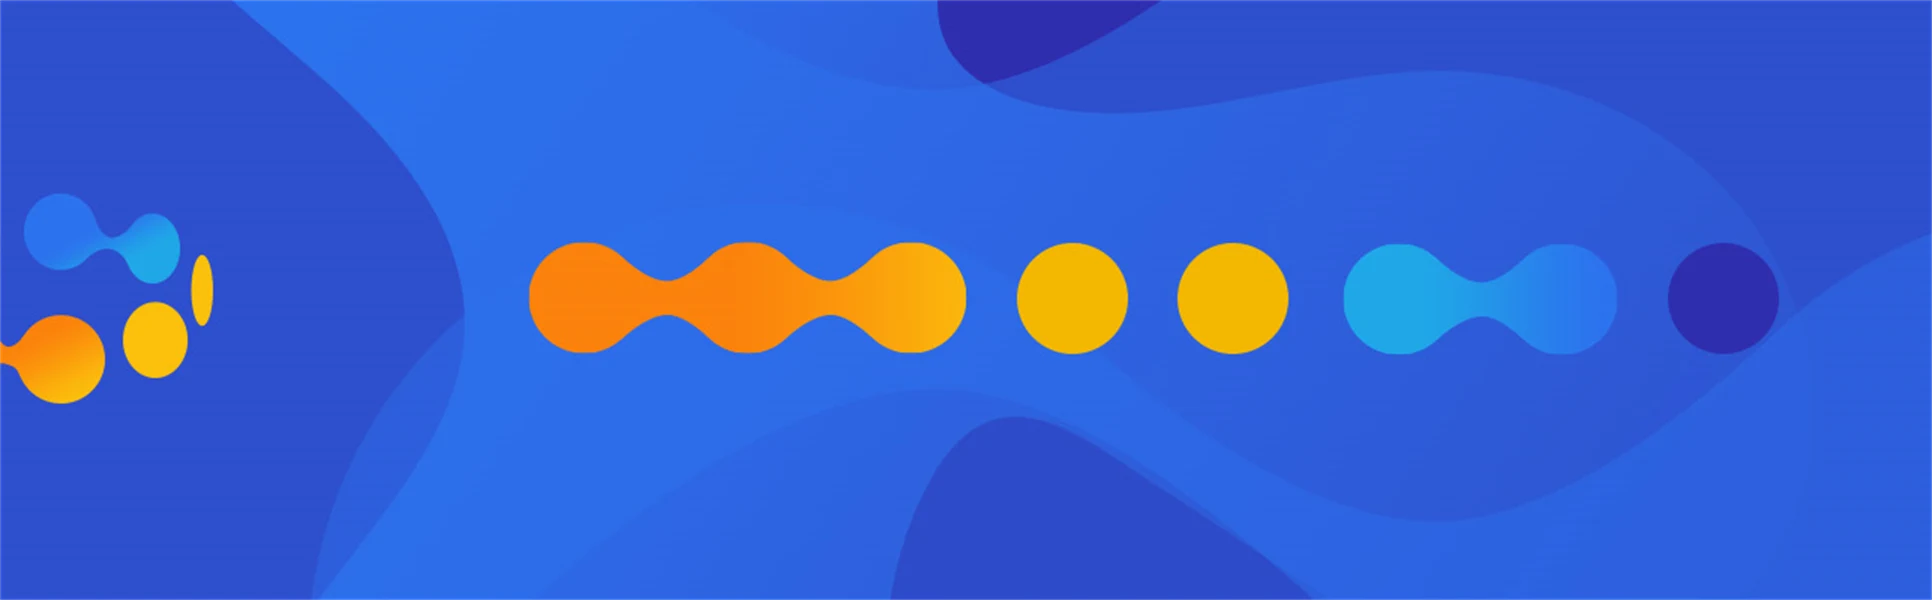 Abstract illustration in blue and orange.